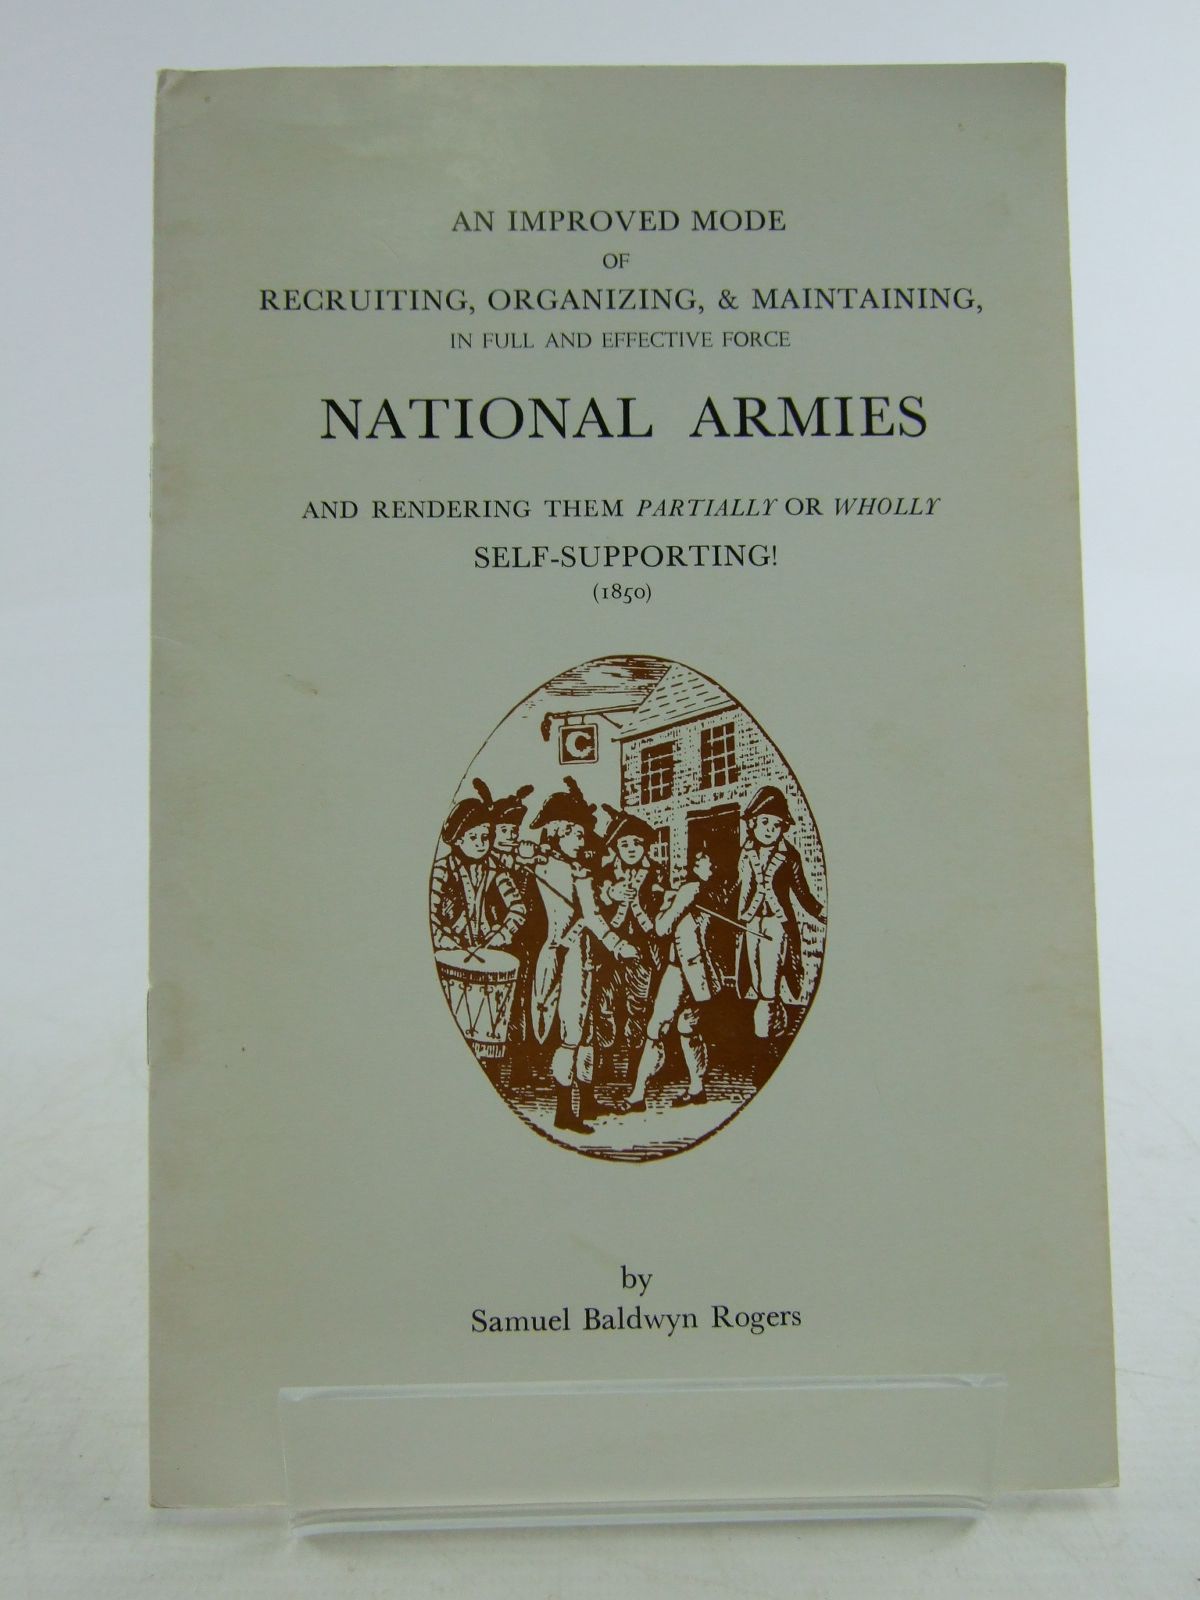 Photo of AN IMPROVED MODE OF RECRUITING, ORGANISING, & MAINTAINING, NATIONAL ARMIES written by Rogers, Samuel Baldwyn published by Moss Rose Press (STOCK CODE: 1806874)  for sale by Stella & Rose's Books